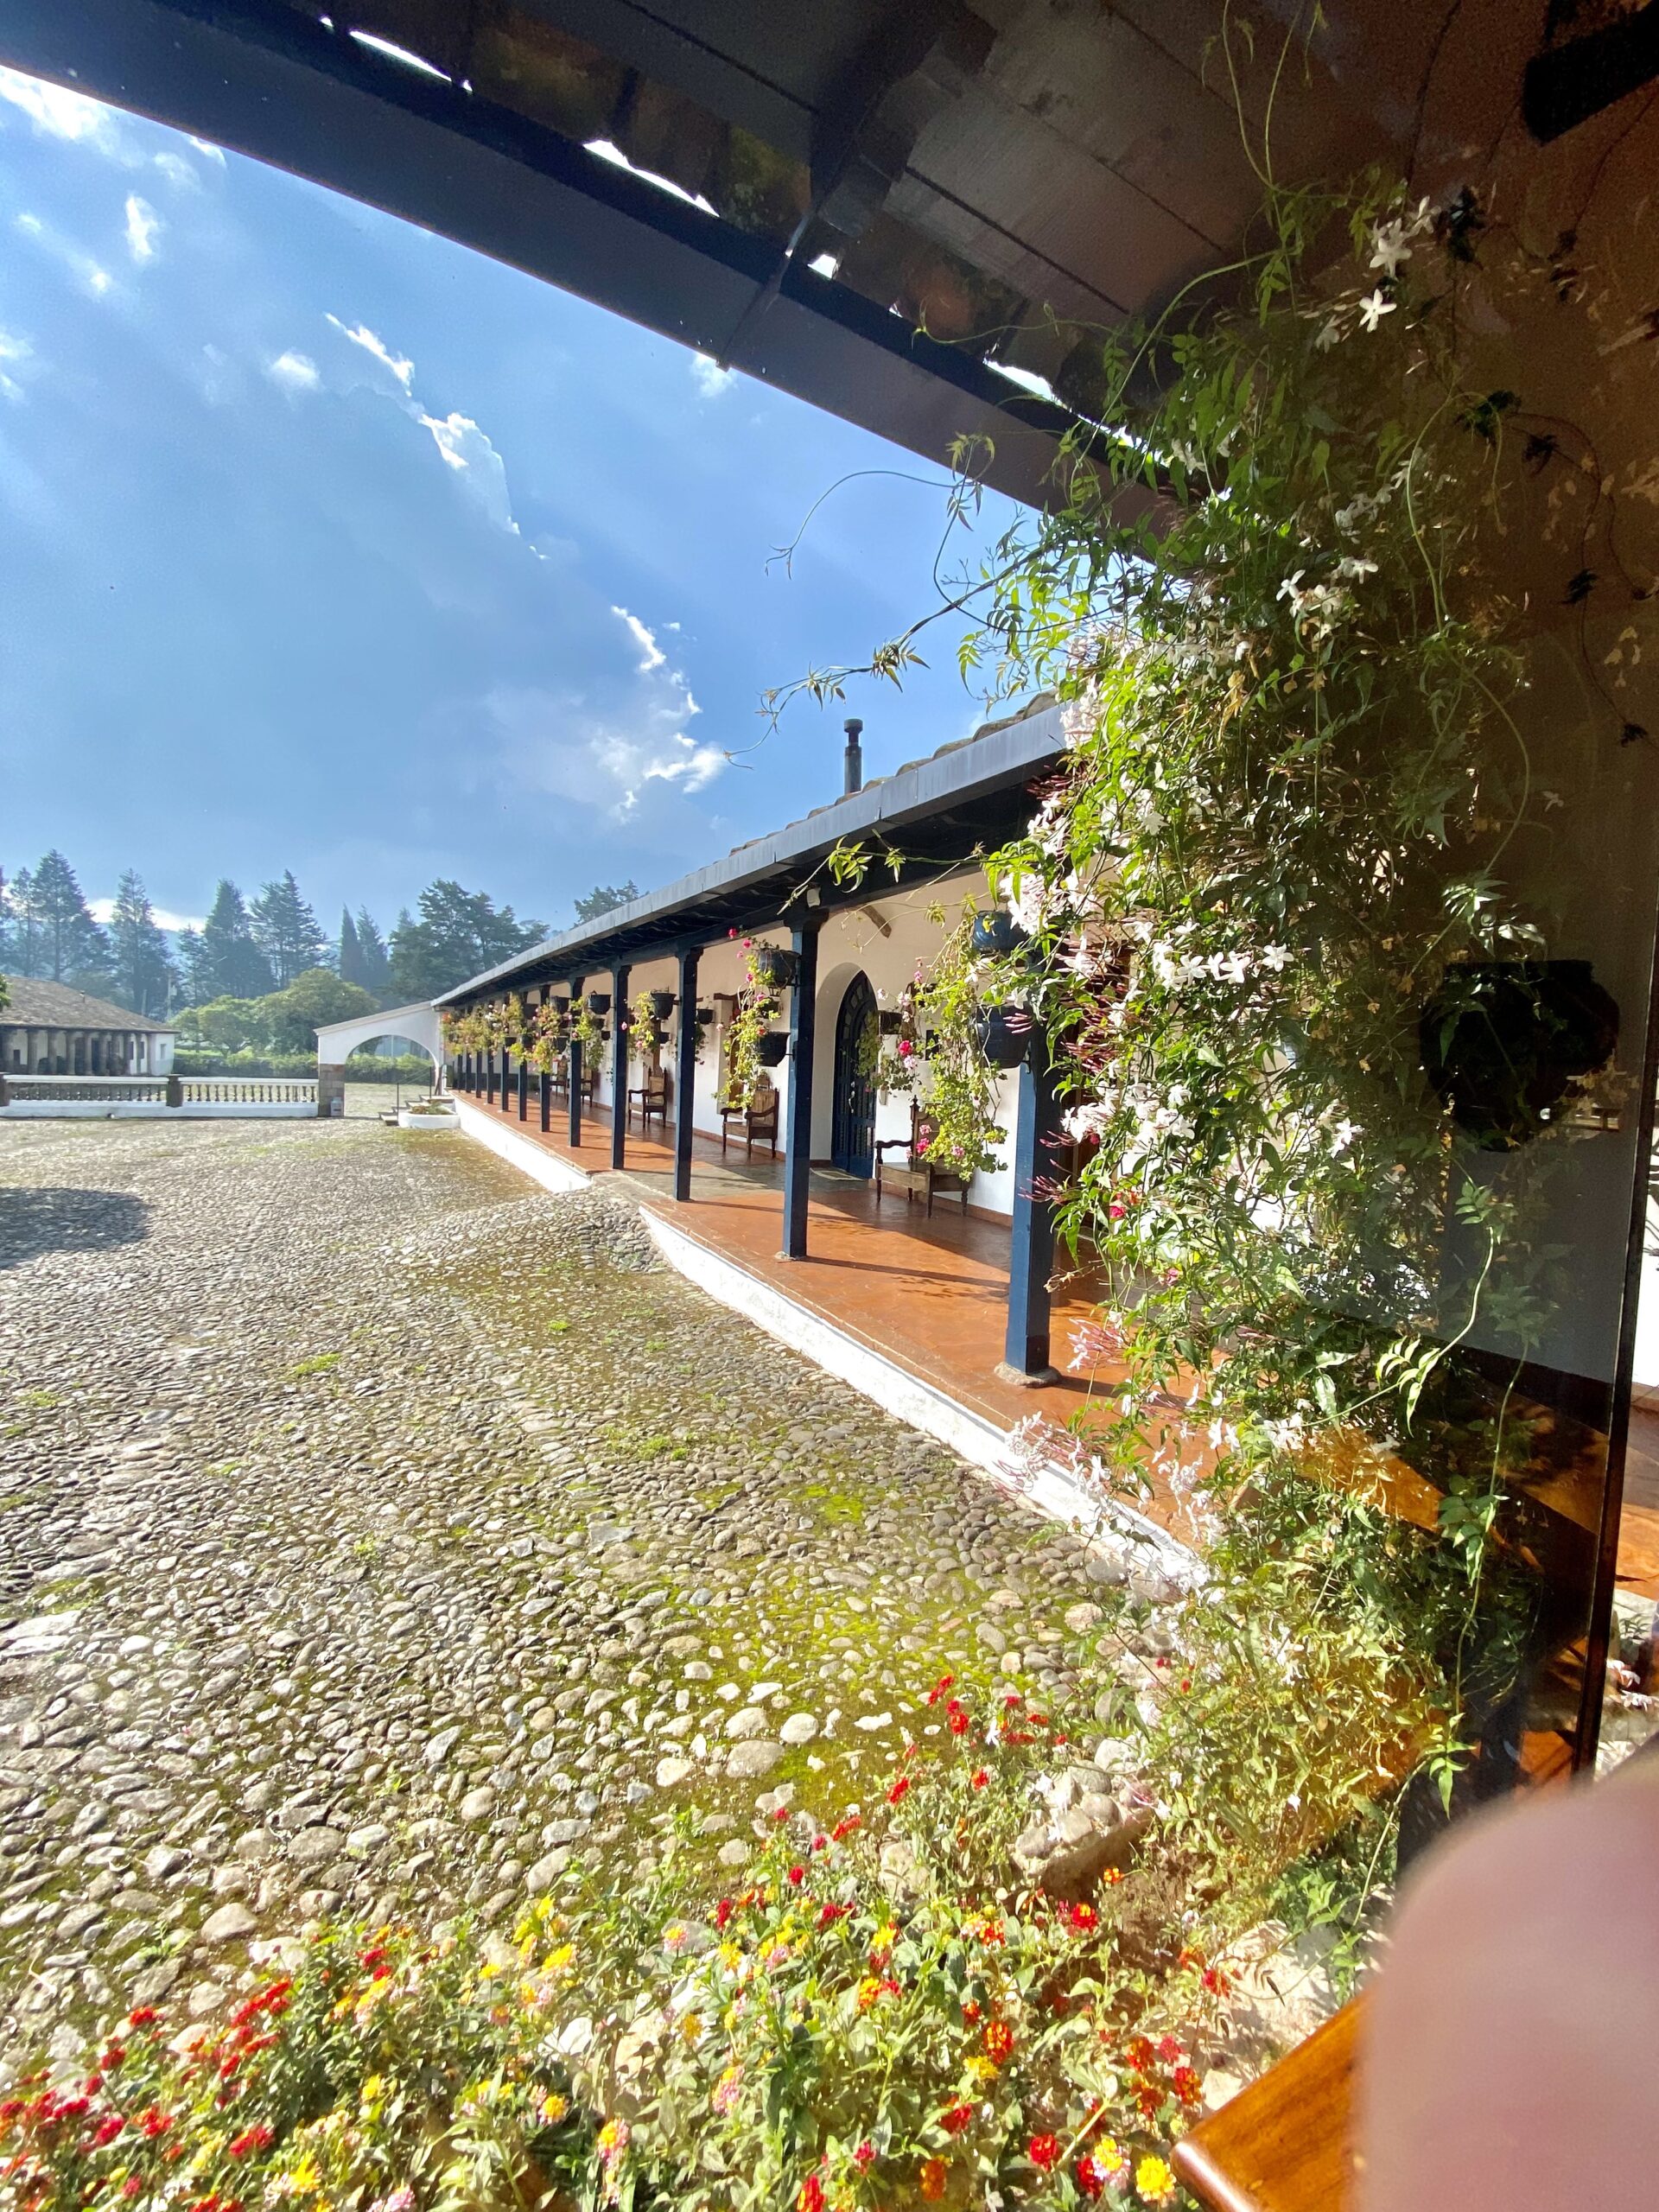 This is a photo of Hacienda Zuleta where you can see part of the hacienda and decorative flowers